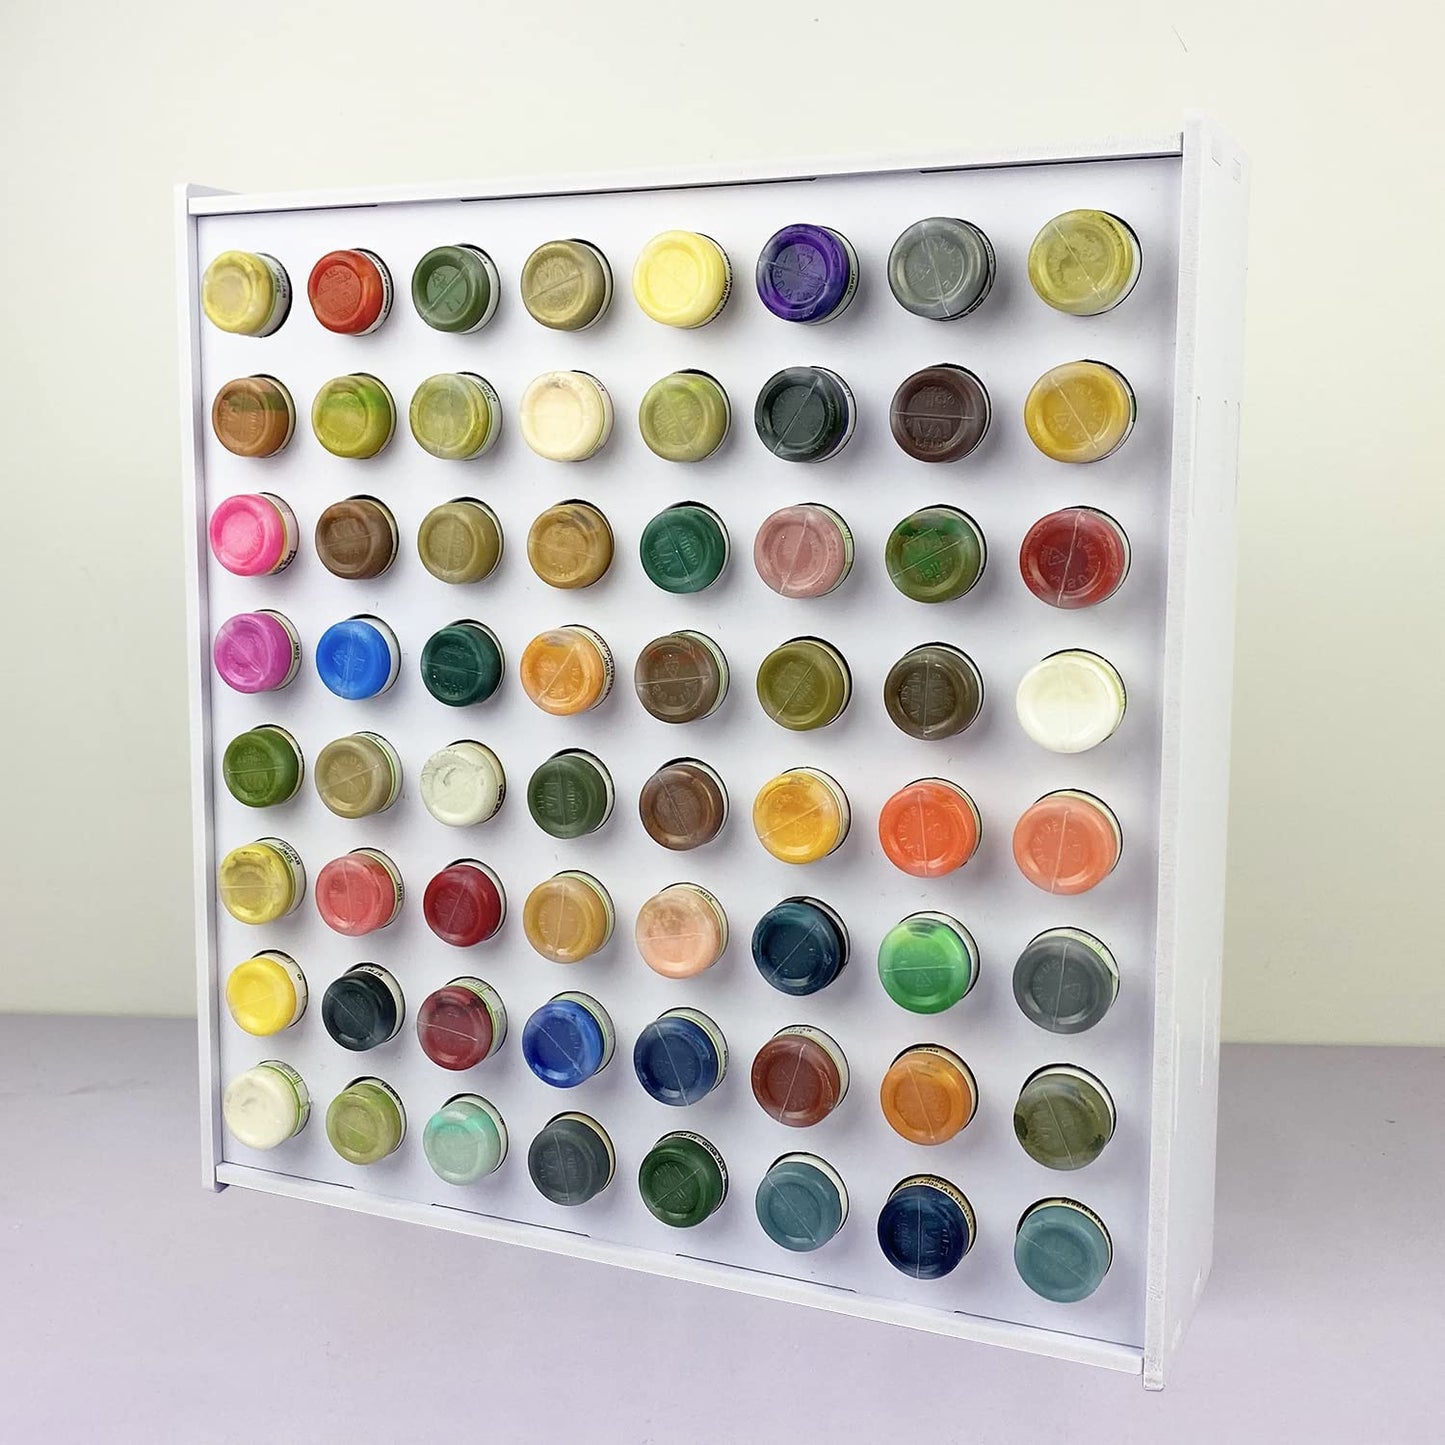 64 Holes Paint Rack for 17ml Dropper Bottles, Wall-mounted